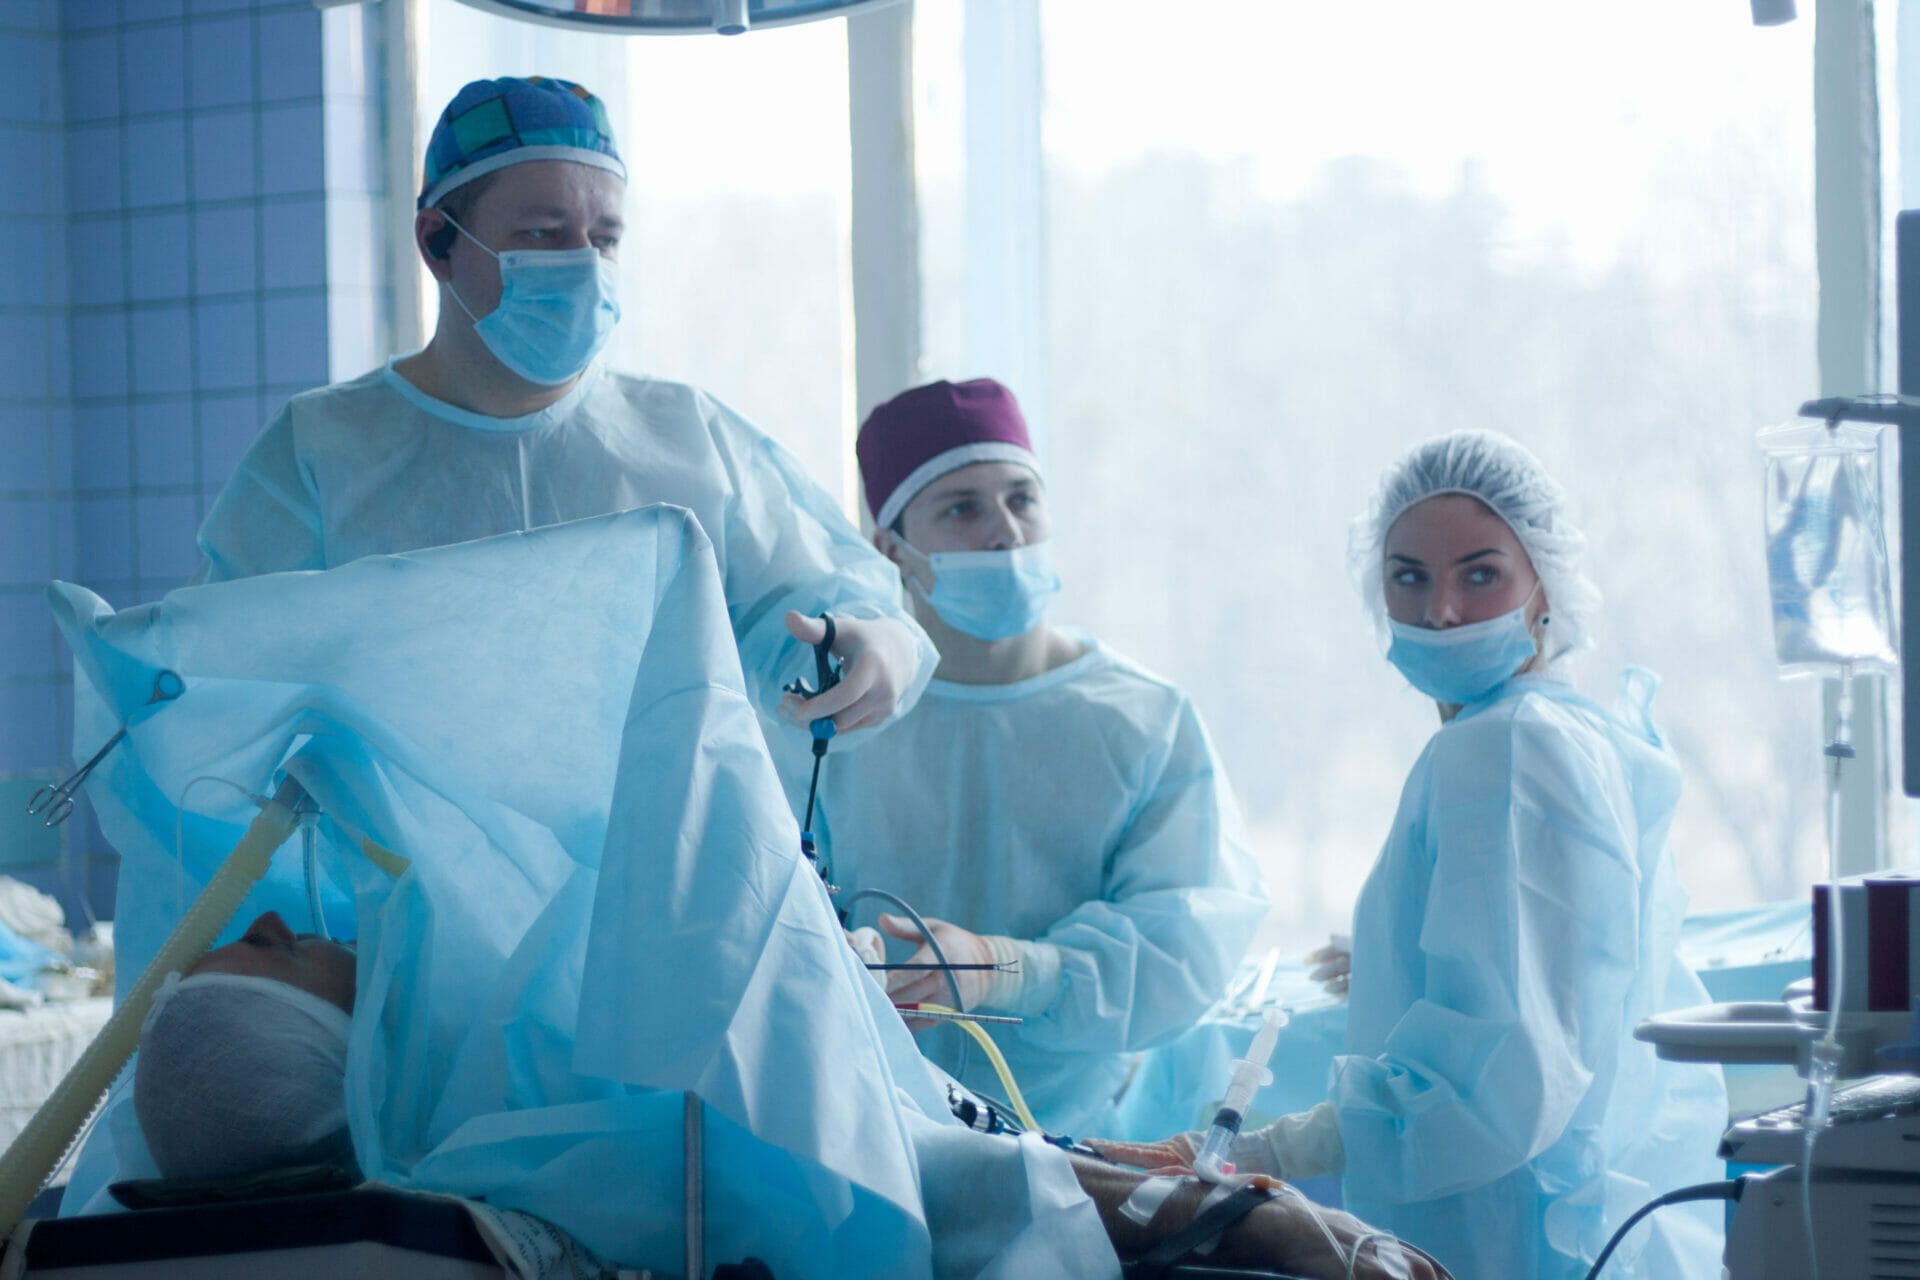 3 surgeons carrying out gallbladder removal surgery on a patient